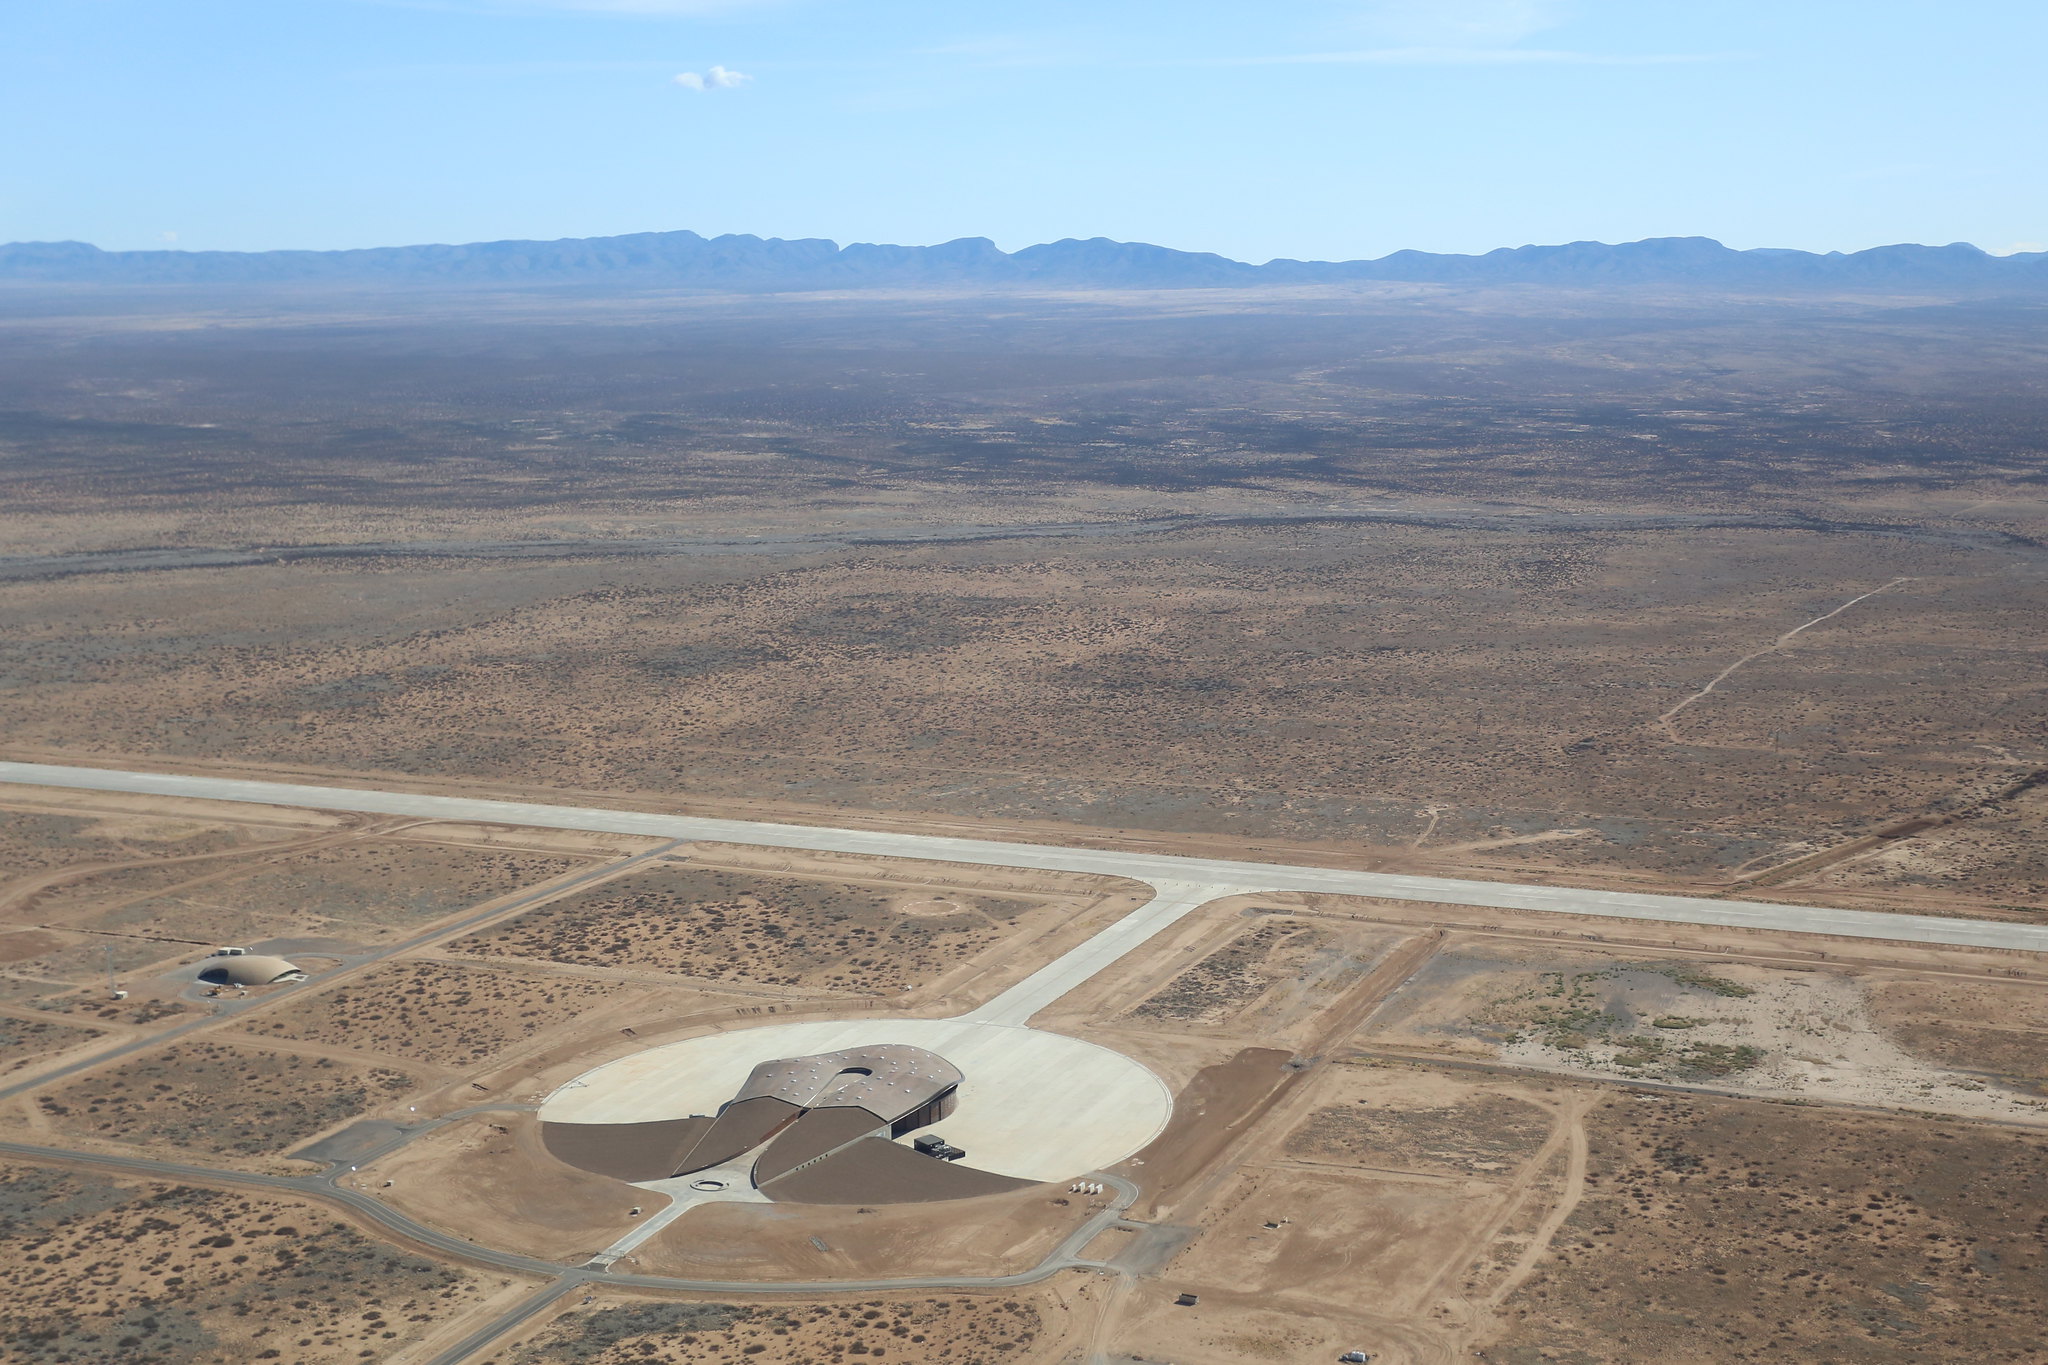 Inland spaceports are looking for ways to host orbital launches